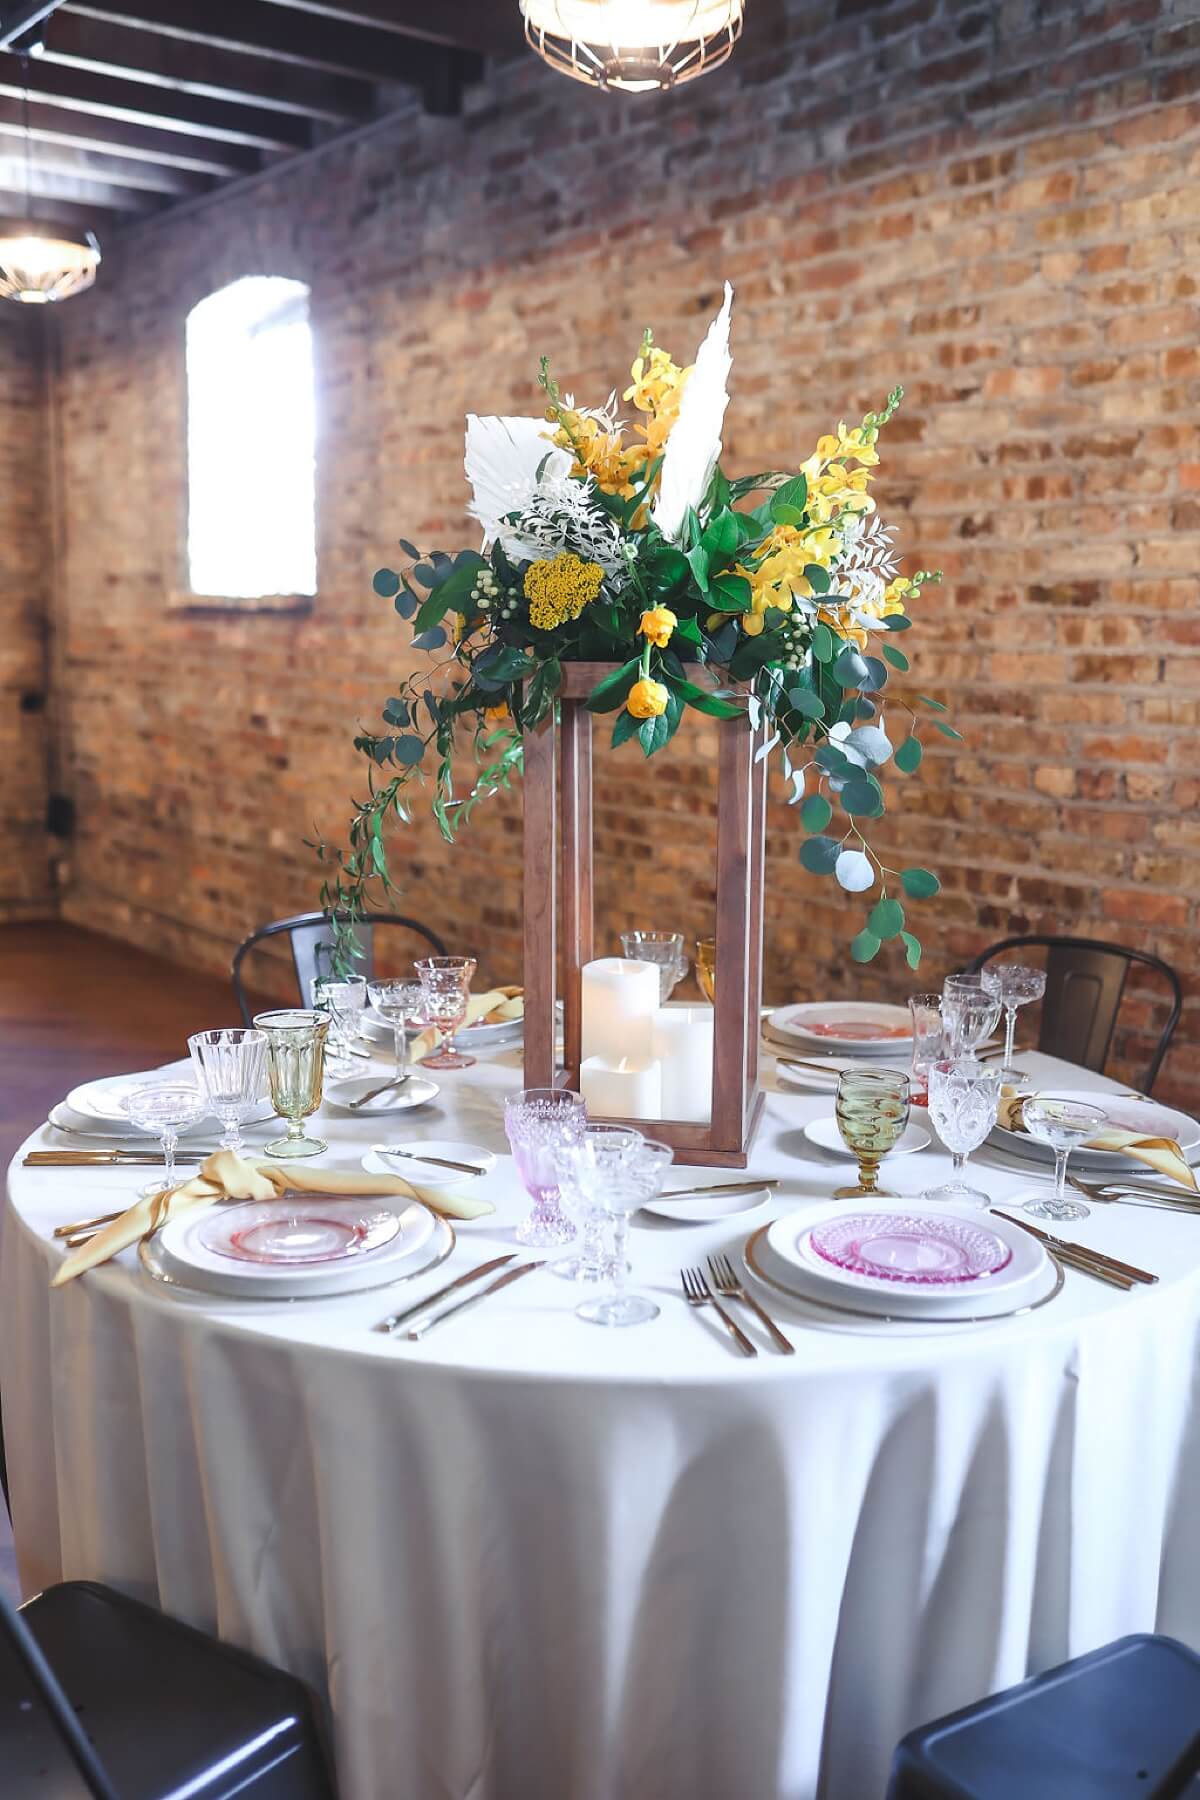 Tall wooden centerpiece with yellow and white flowers on top